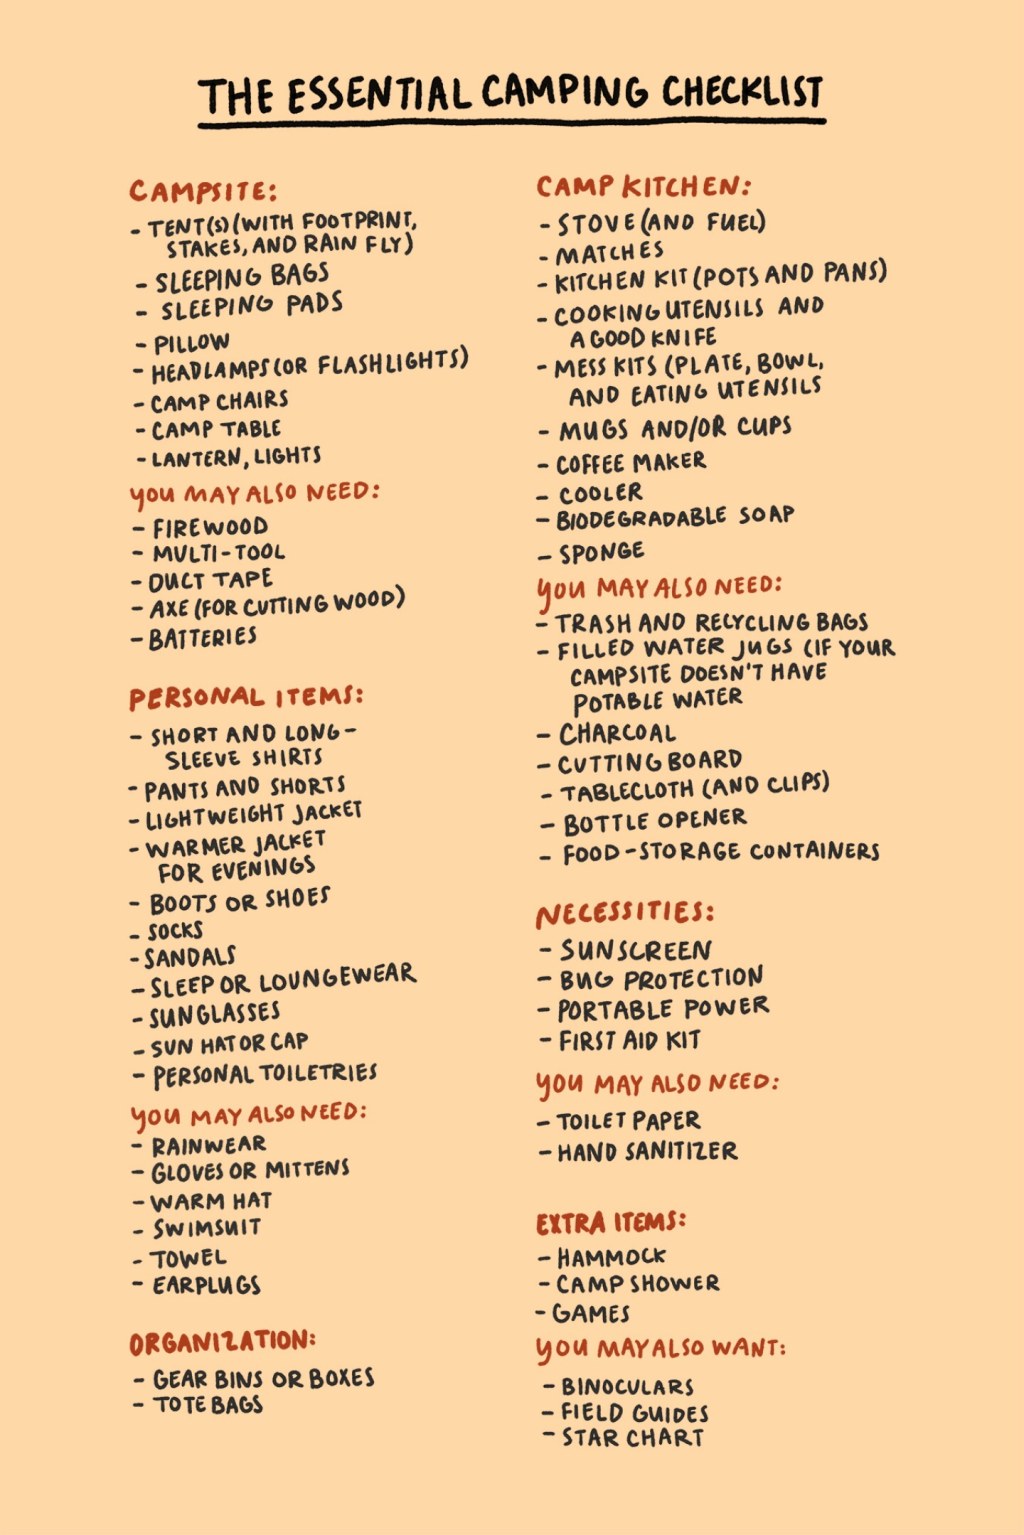 Picture of: The Essential Camping Checklist for a Weekend Outdoors – AFAR